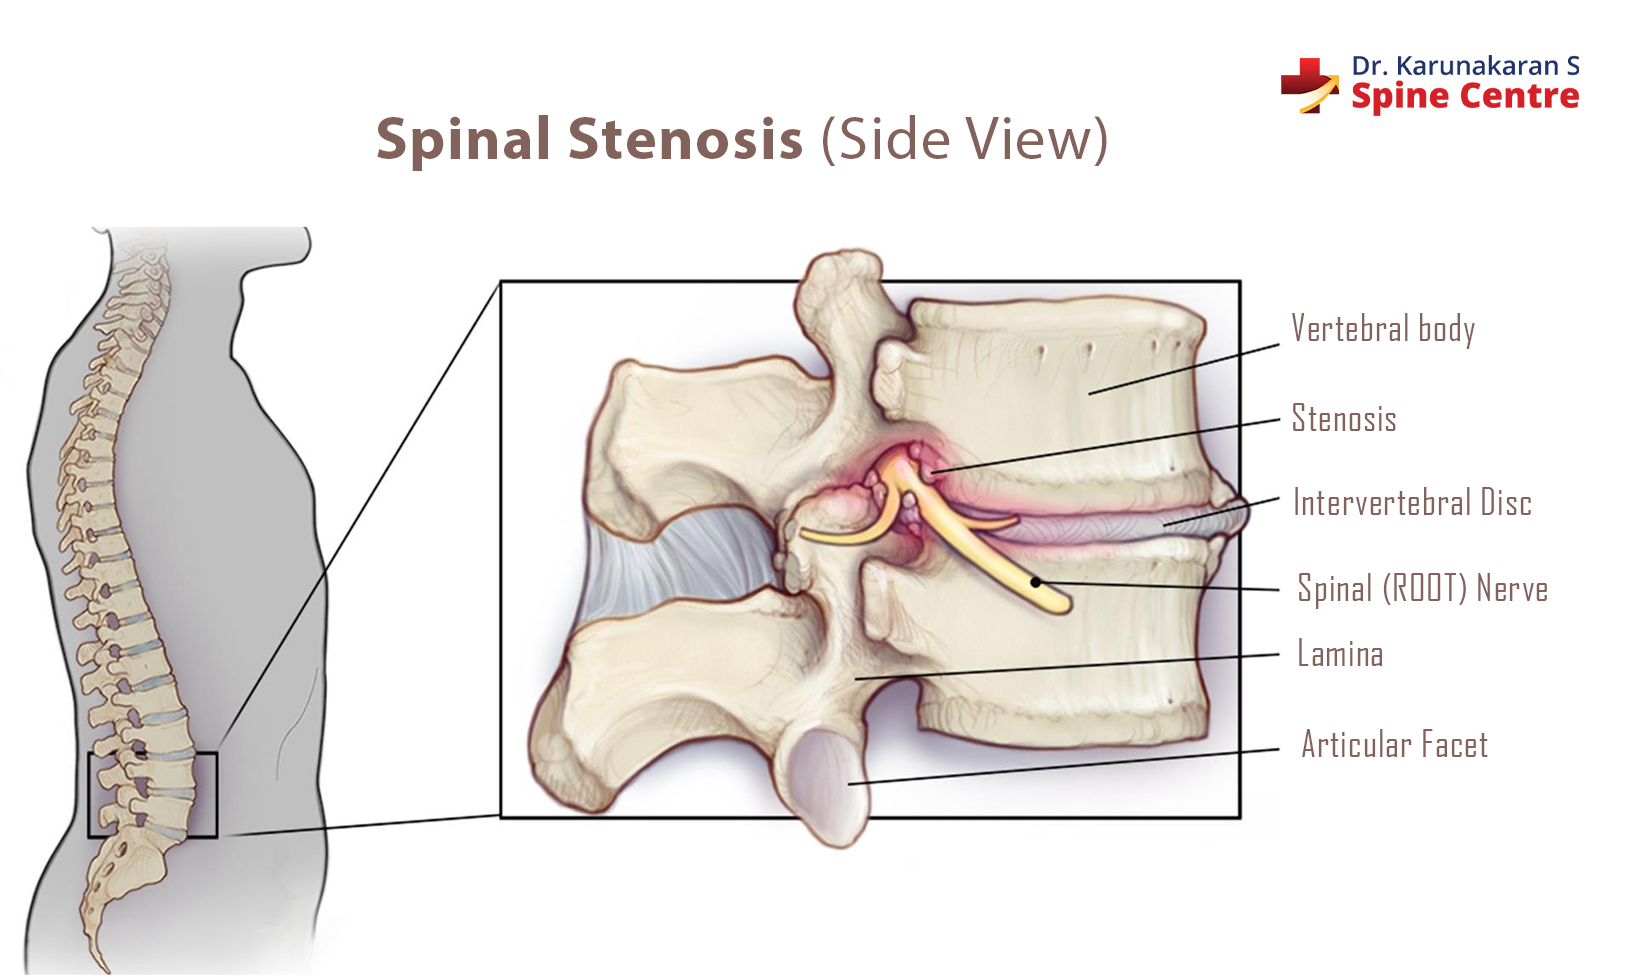 signs and symptoms of spinal stenosis